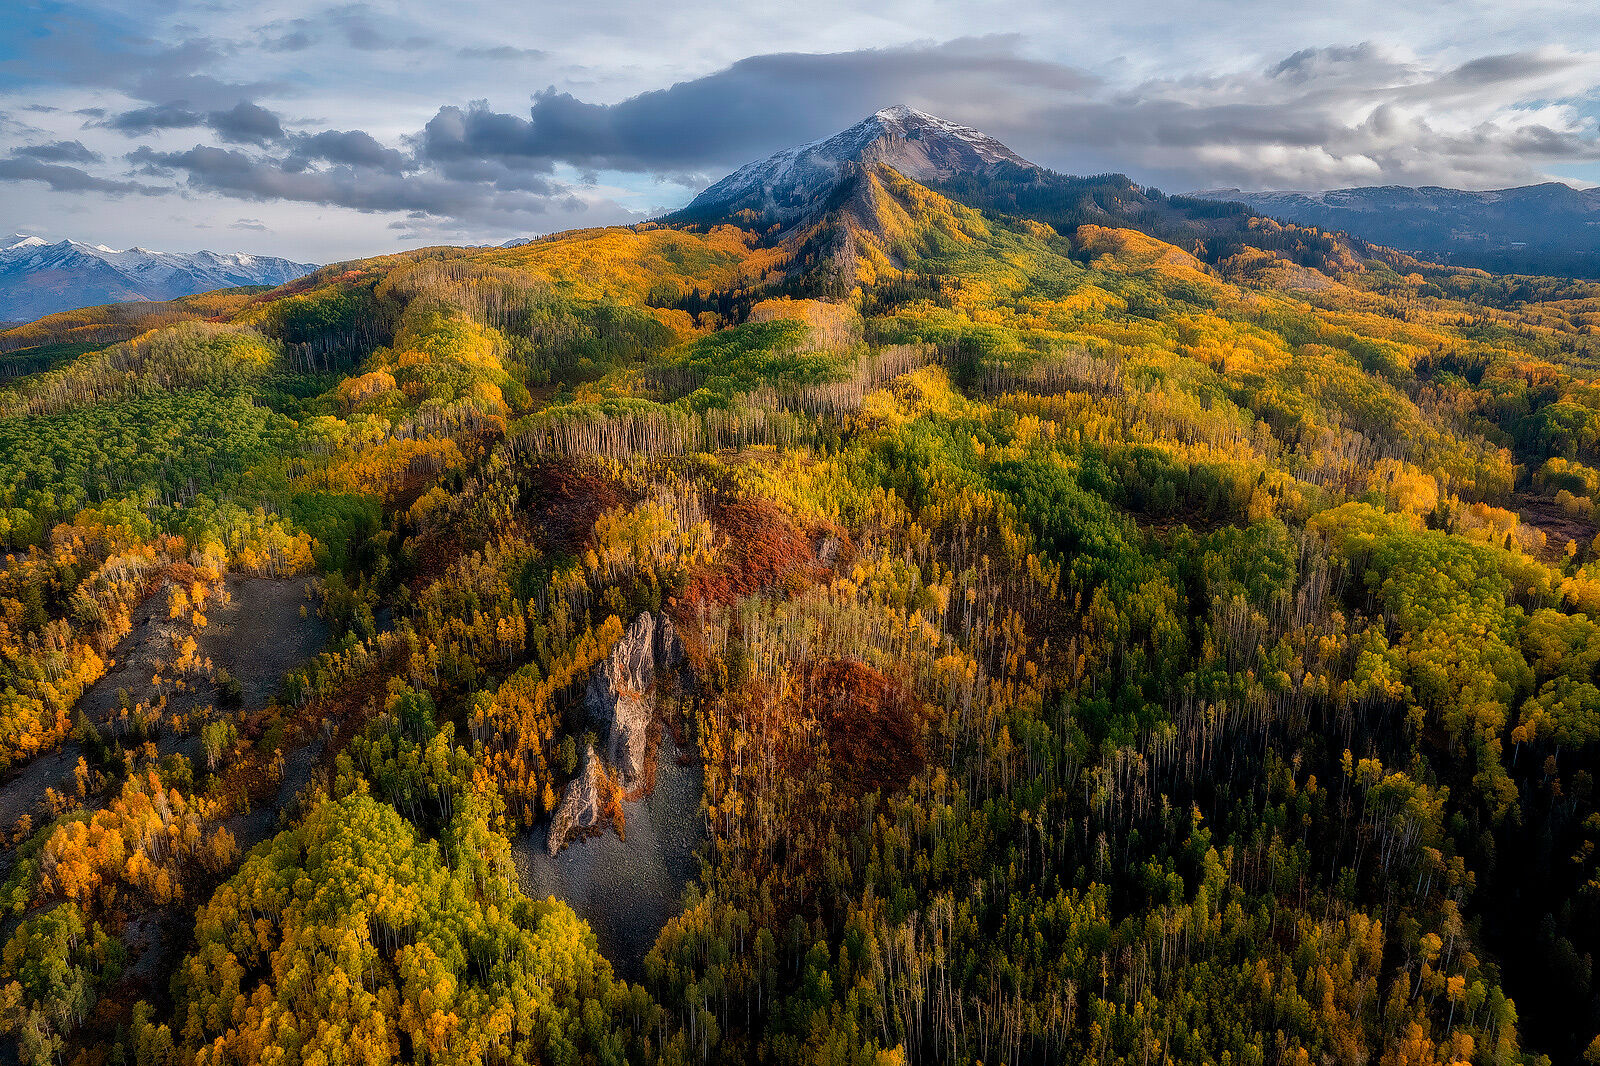 Mountain stands off in the distance surrounded by aspen trees in fall colors on hills descending from the mountain.